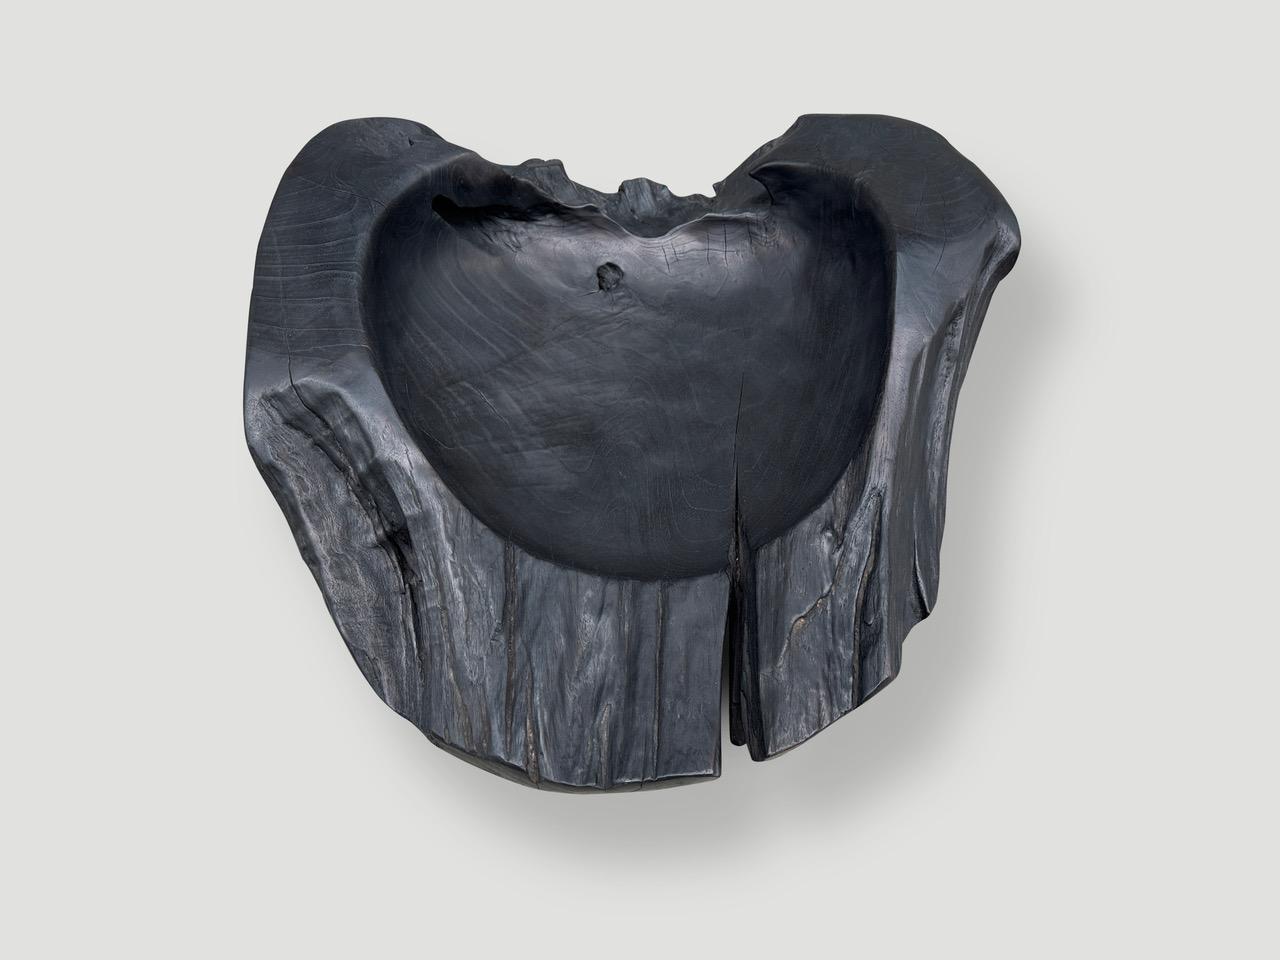 Andrianna Shamaris Oversized Charred Sculptural Teak Wood Vessel In Excellent Condition For Sale In New York, NY